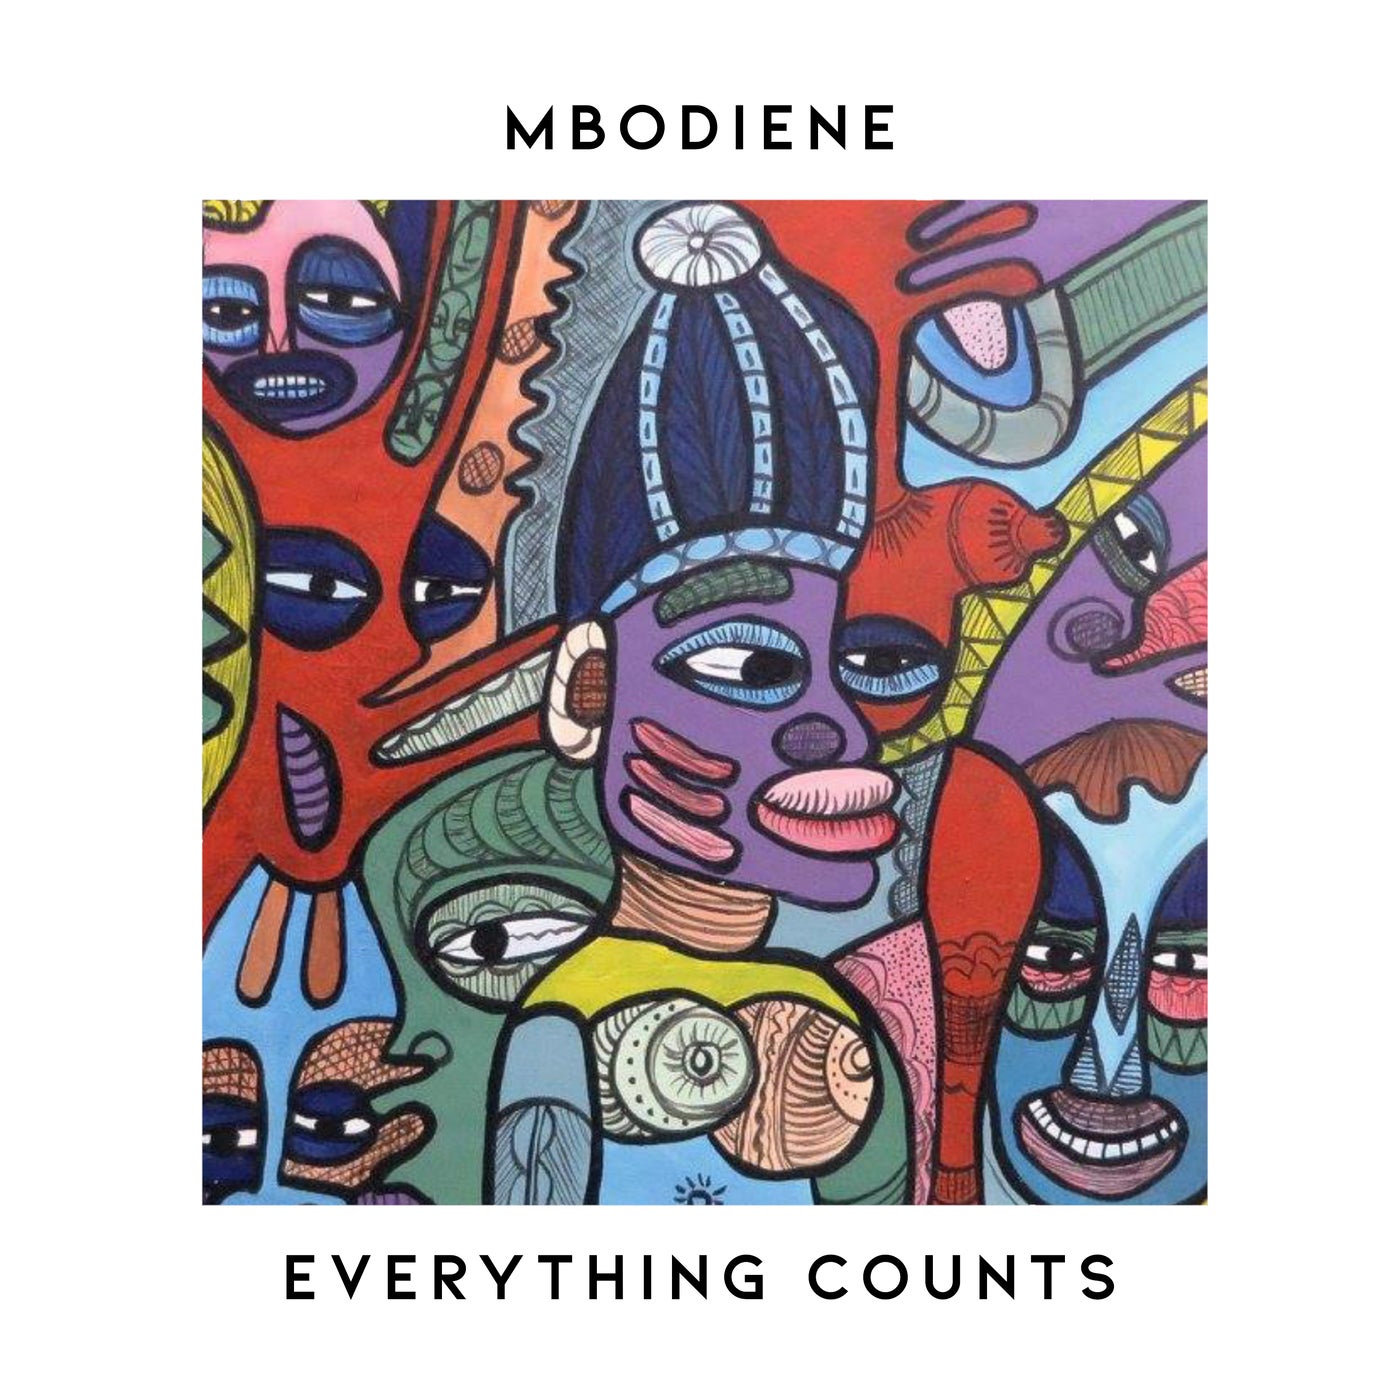 Download Mbodiene on Electrobuzz